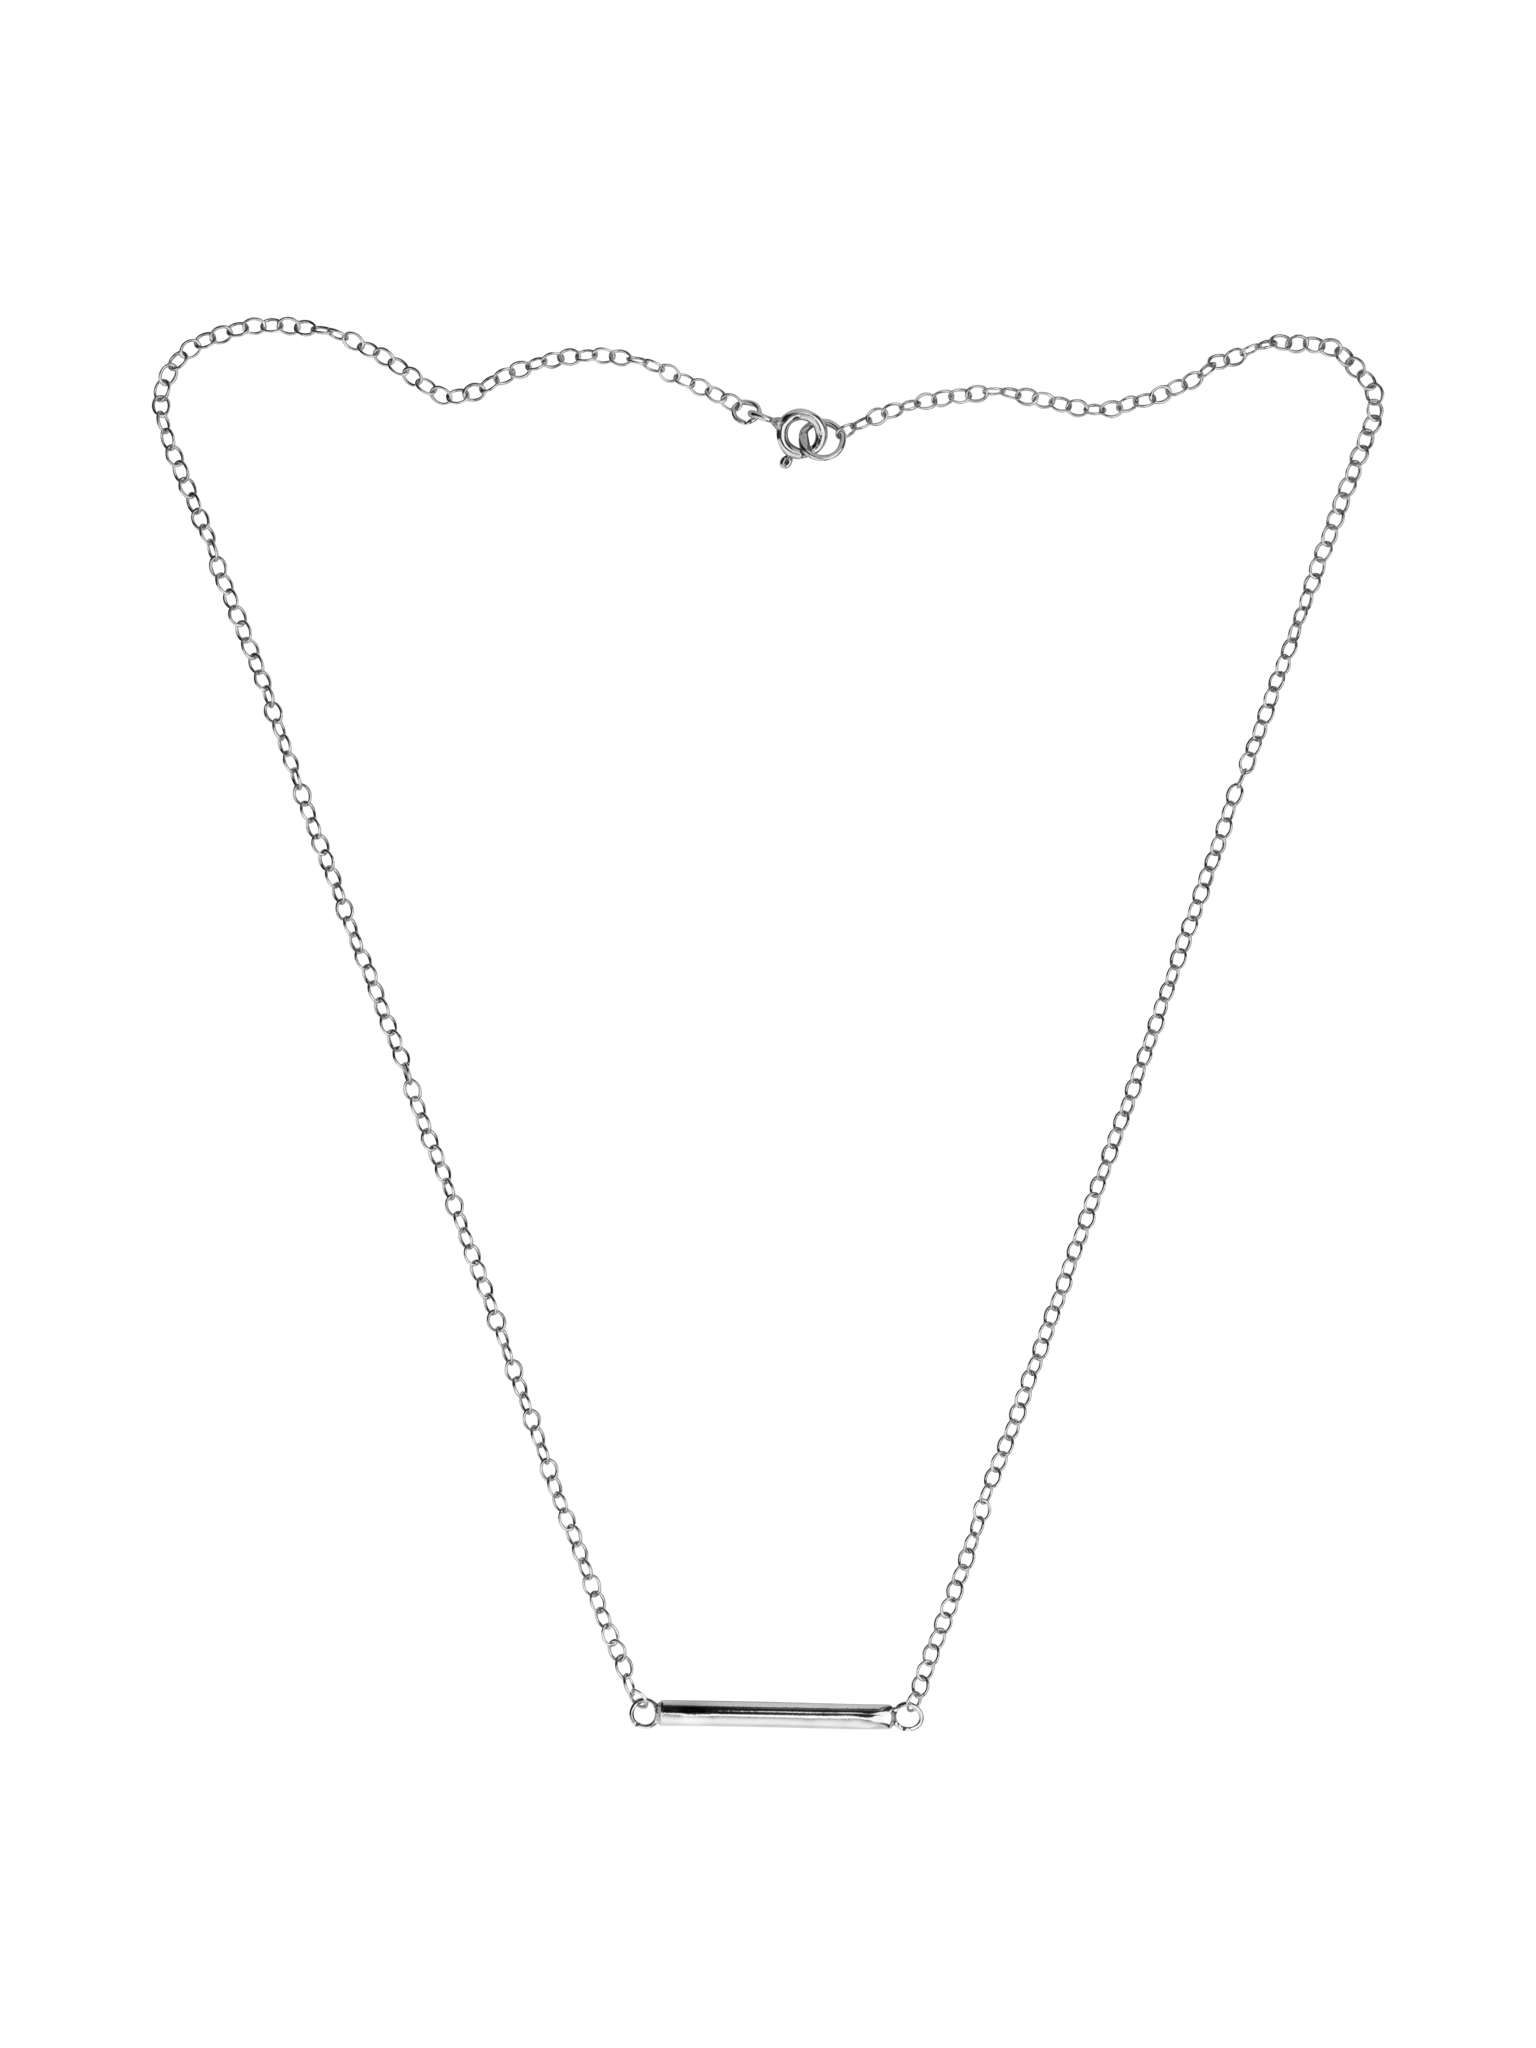 Barre necklace